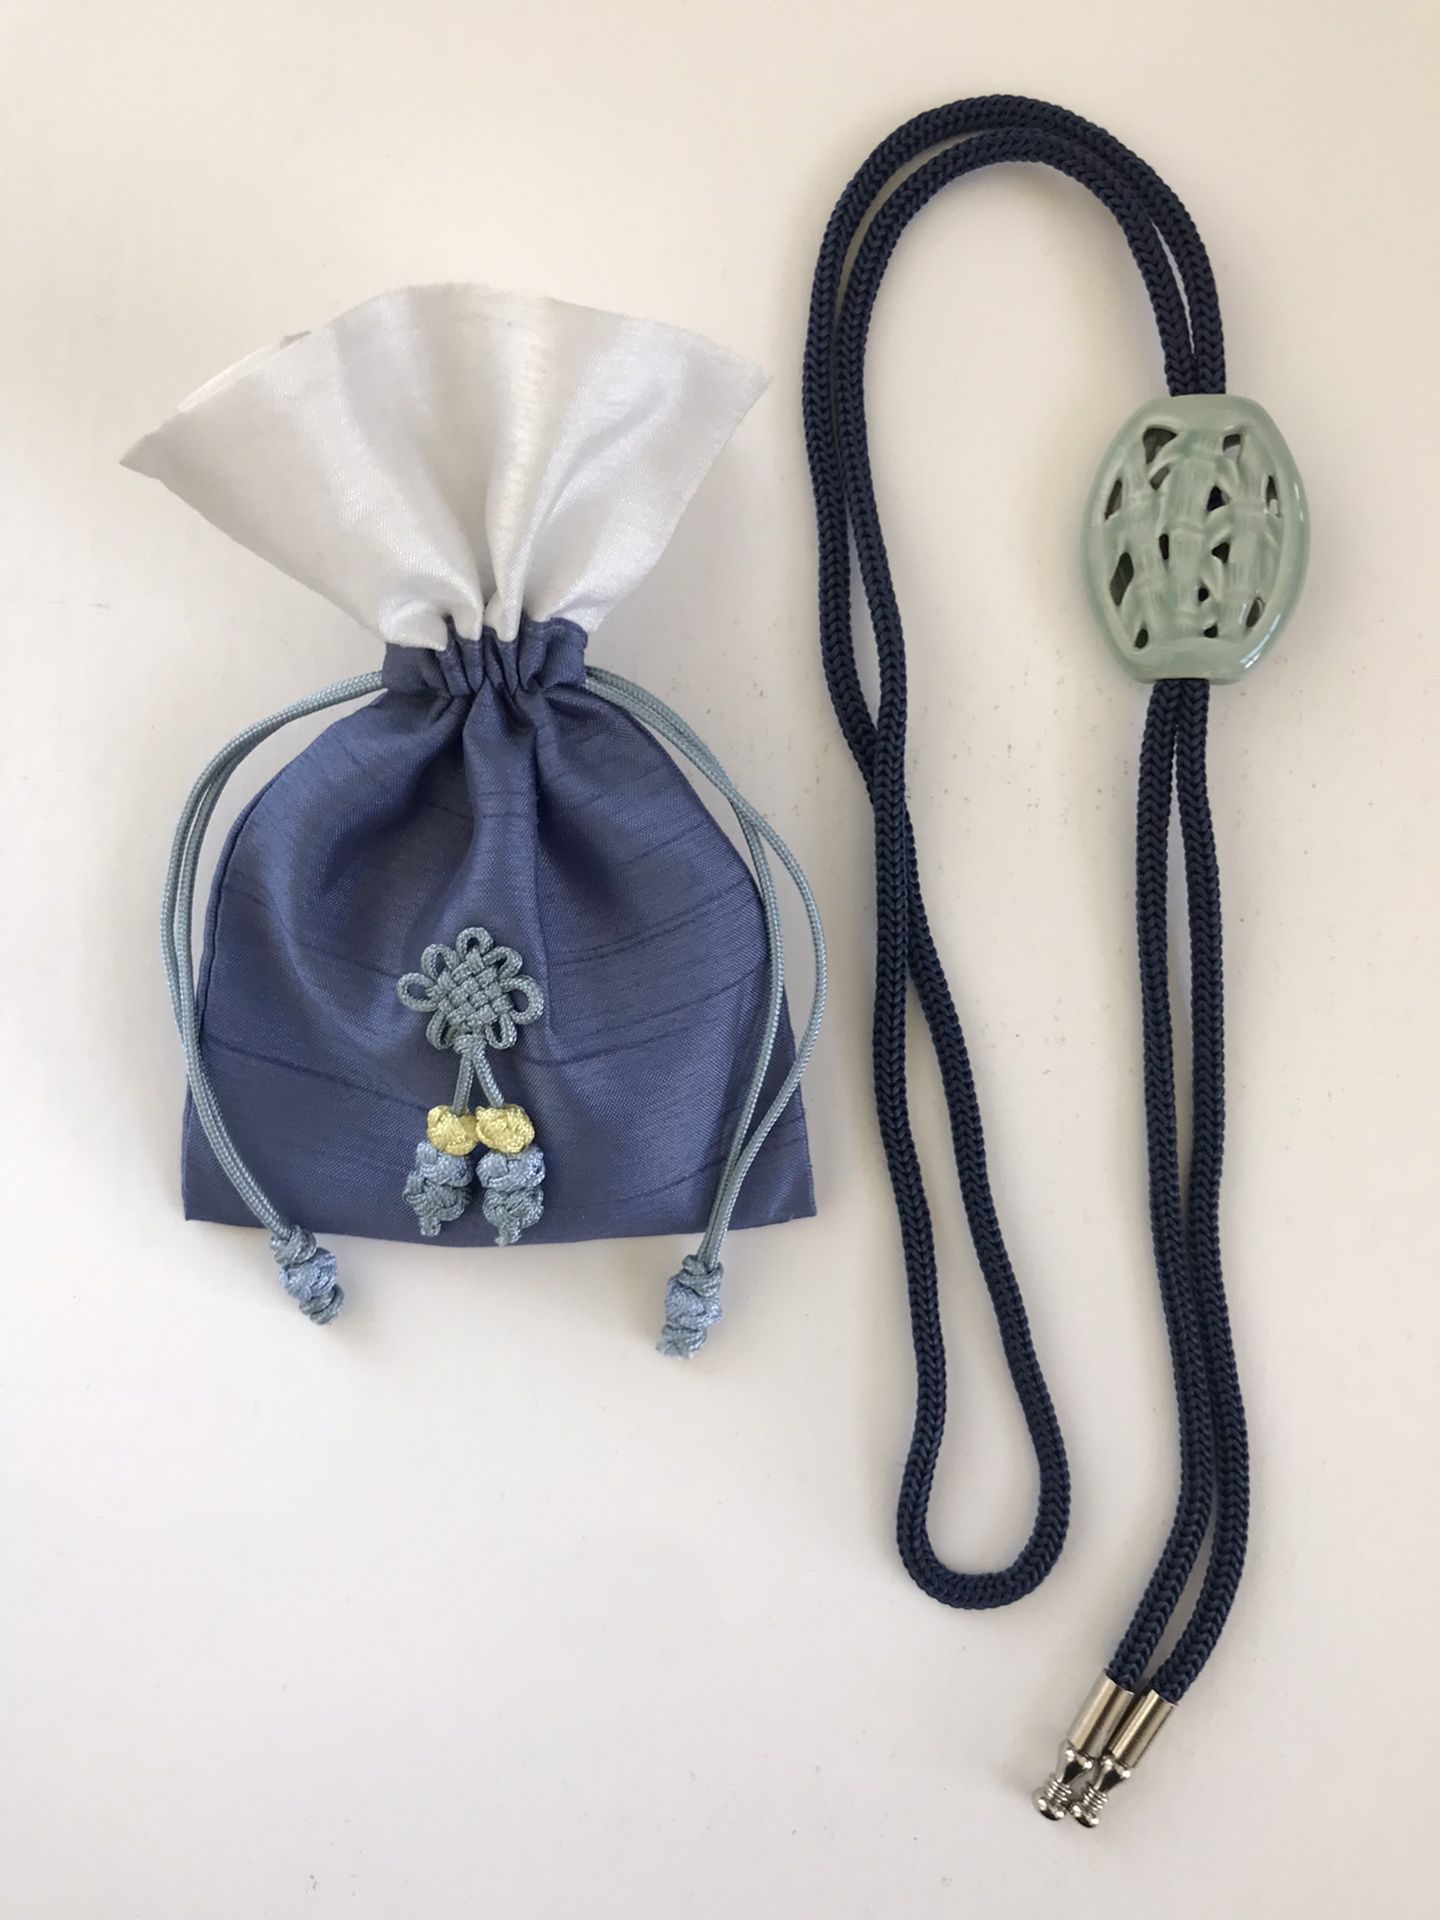 Authentic Korean Bolo Tie With Silk Bag And Certificate